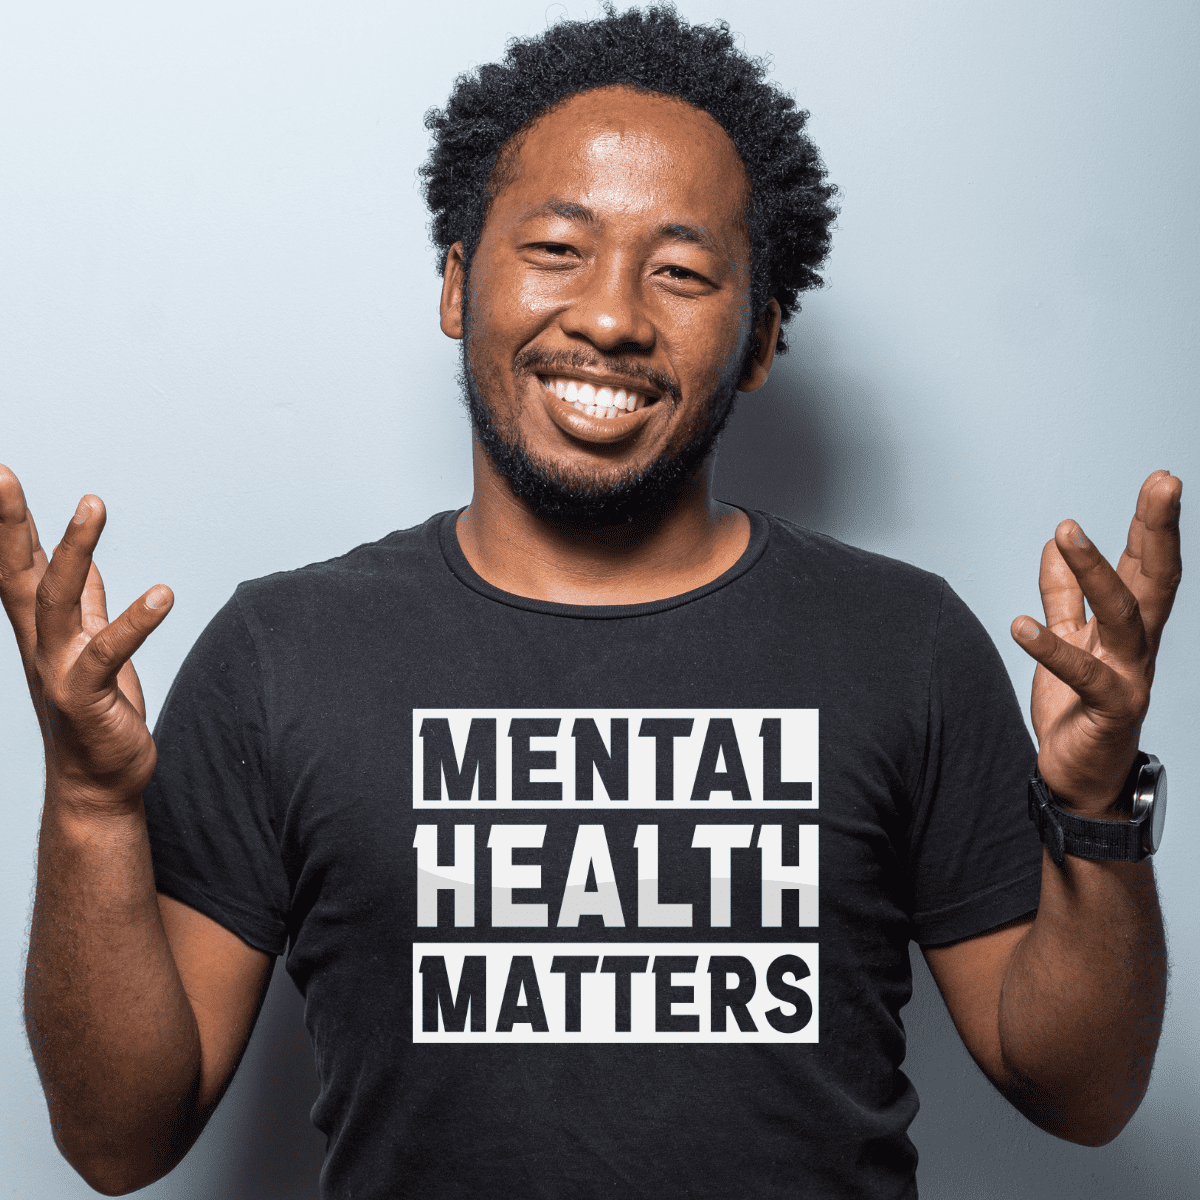 Image shows a t shirt transfer that says Mental Health Matters